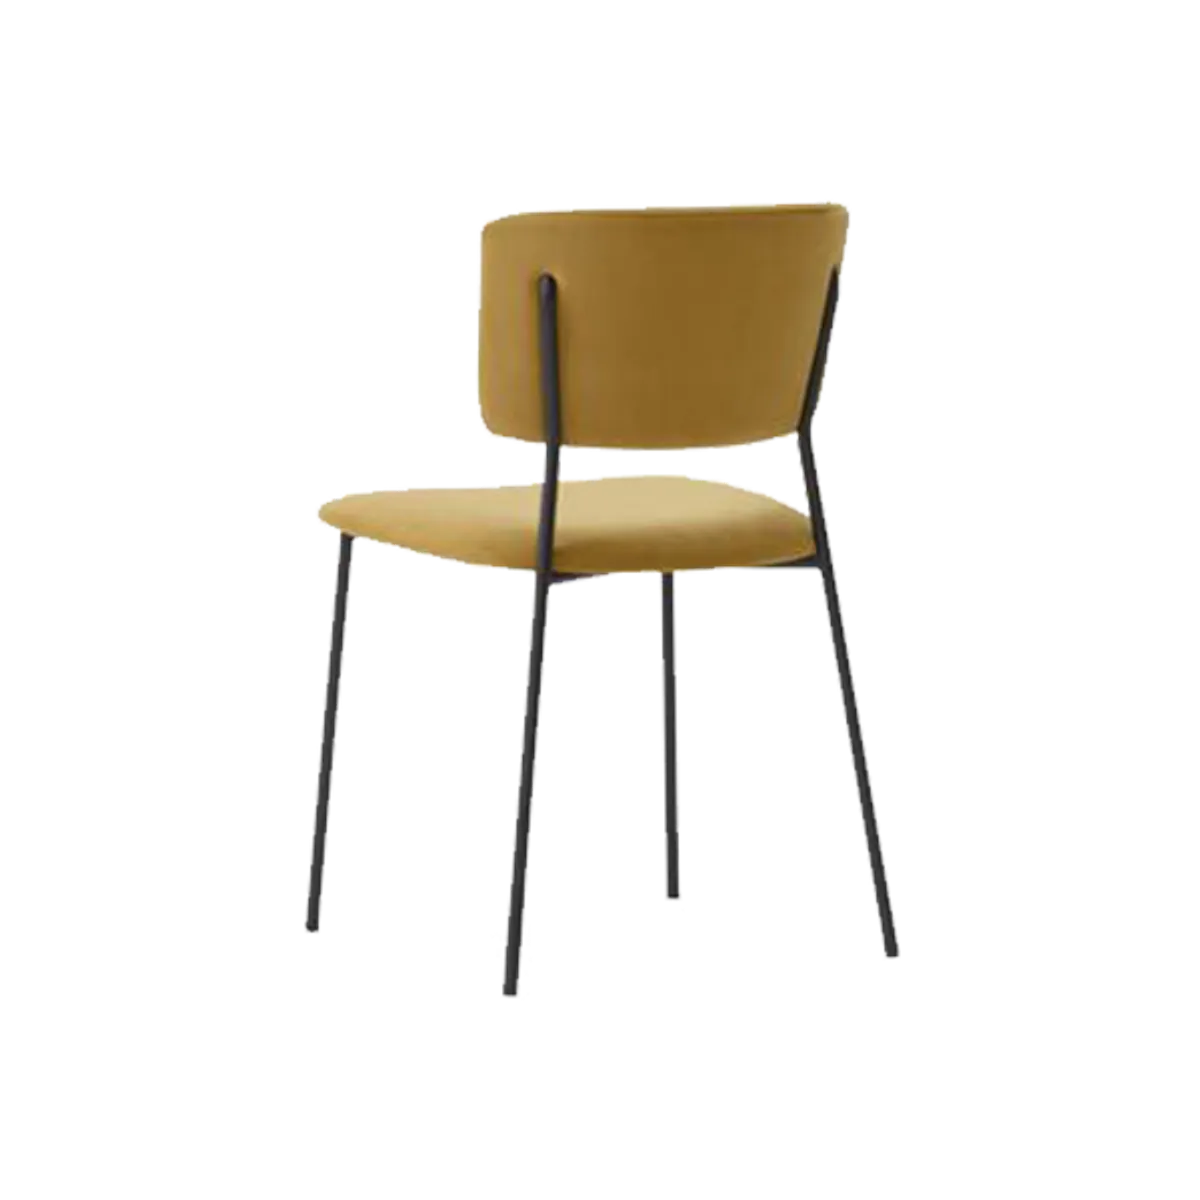 Web Macaron Metal Side Chair In Yellow Upholstery Steel Frame Furniture For Restaurants